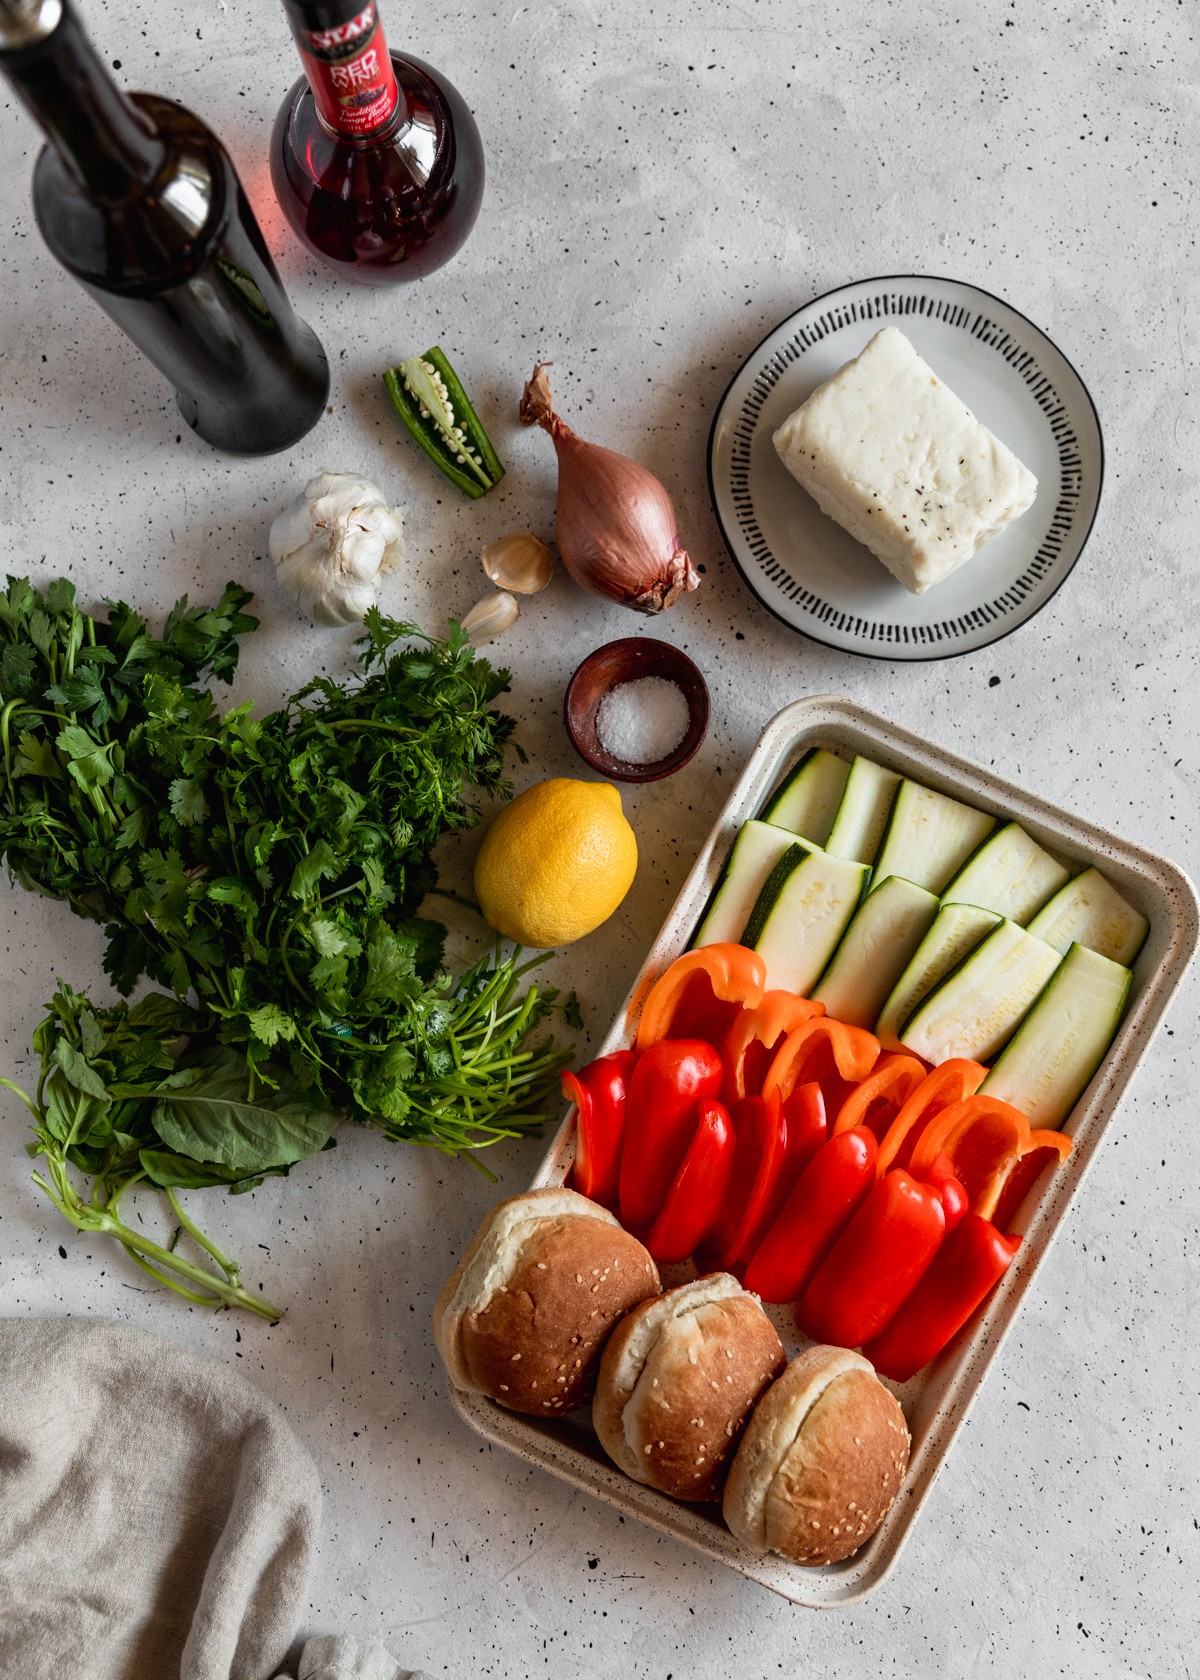 A white tray with peppers, zucchini slices, and buns next to a beige linen, bunches of herbs, a lemon, a shallot, garlic, a white plate of halloumi, a bottle of olive oil, and a bottle of red wine vinegar on a grey table.